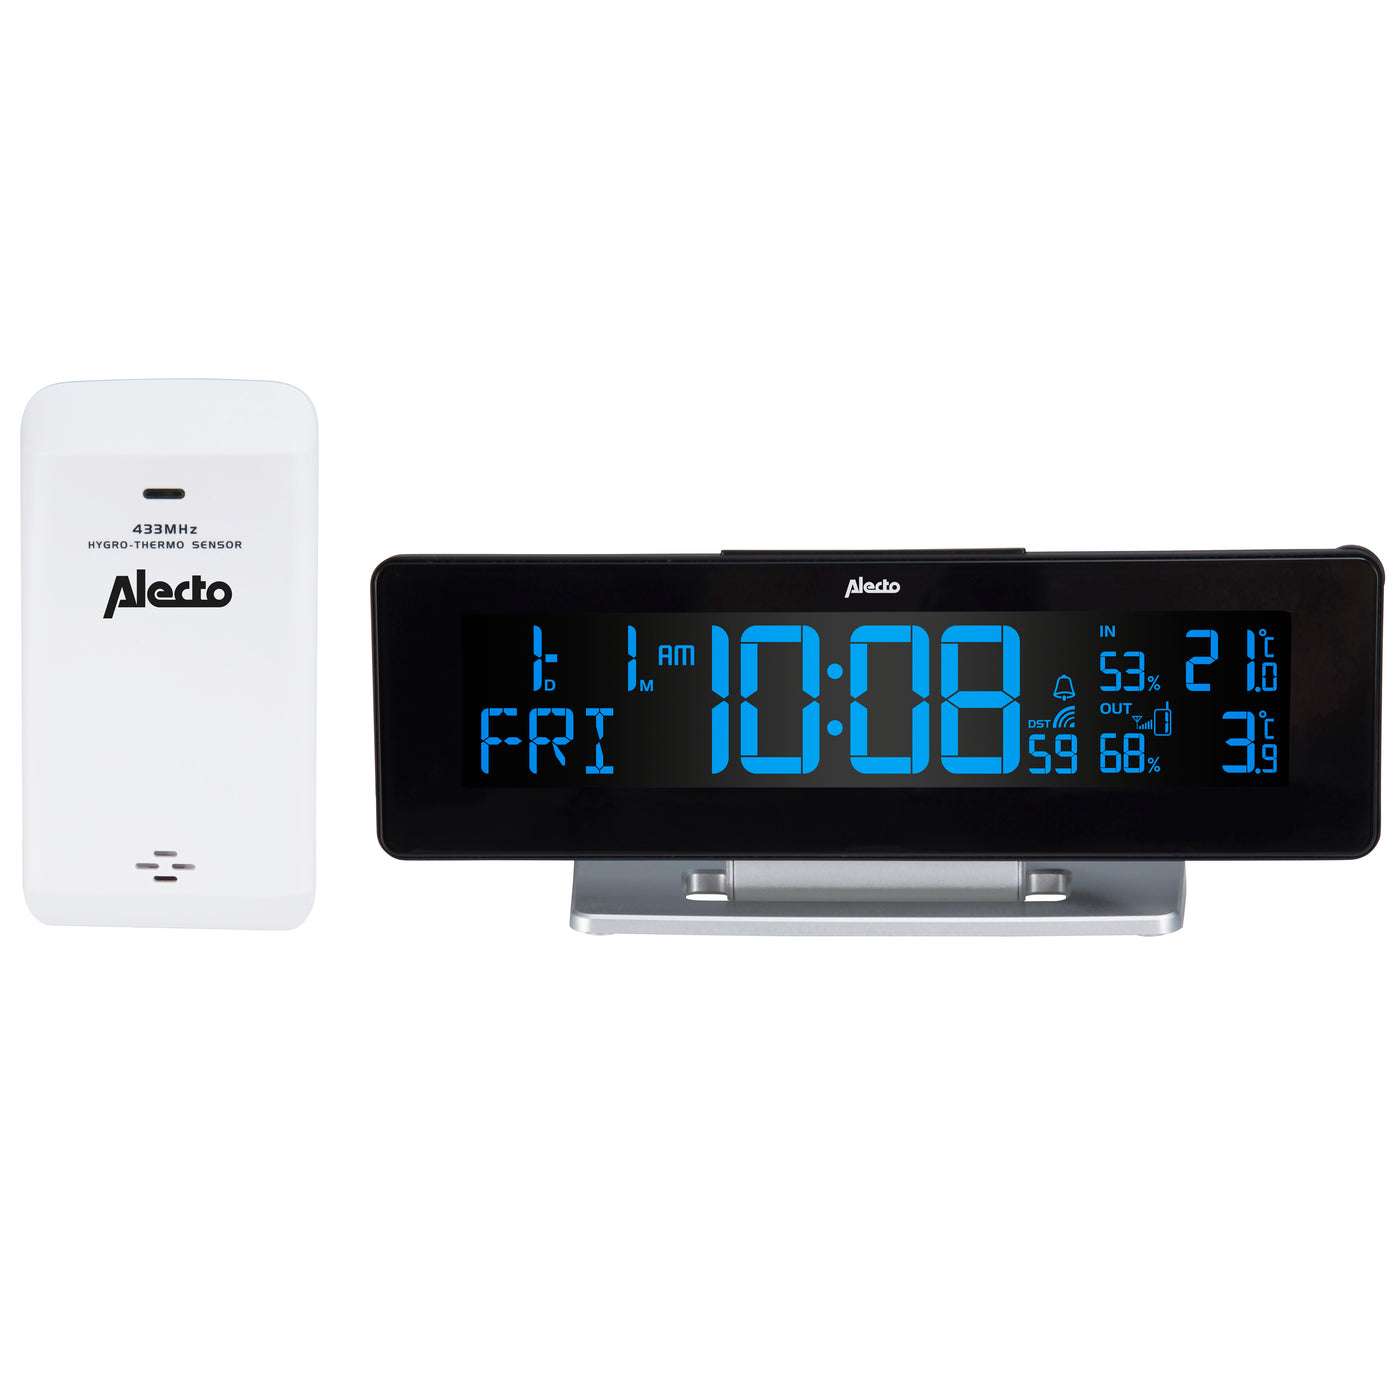 Alecto WS-2500 - Digital alarm clock with weather station